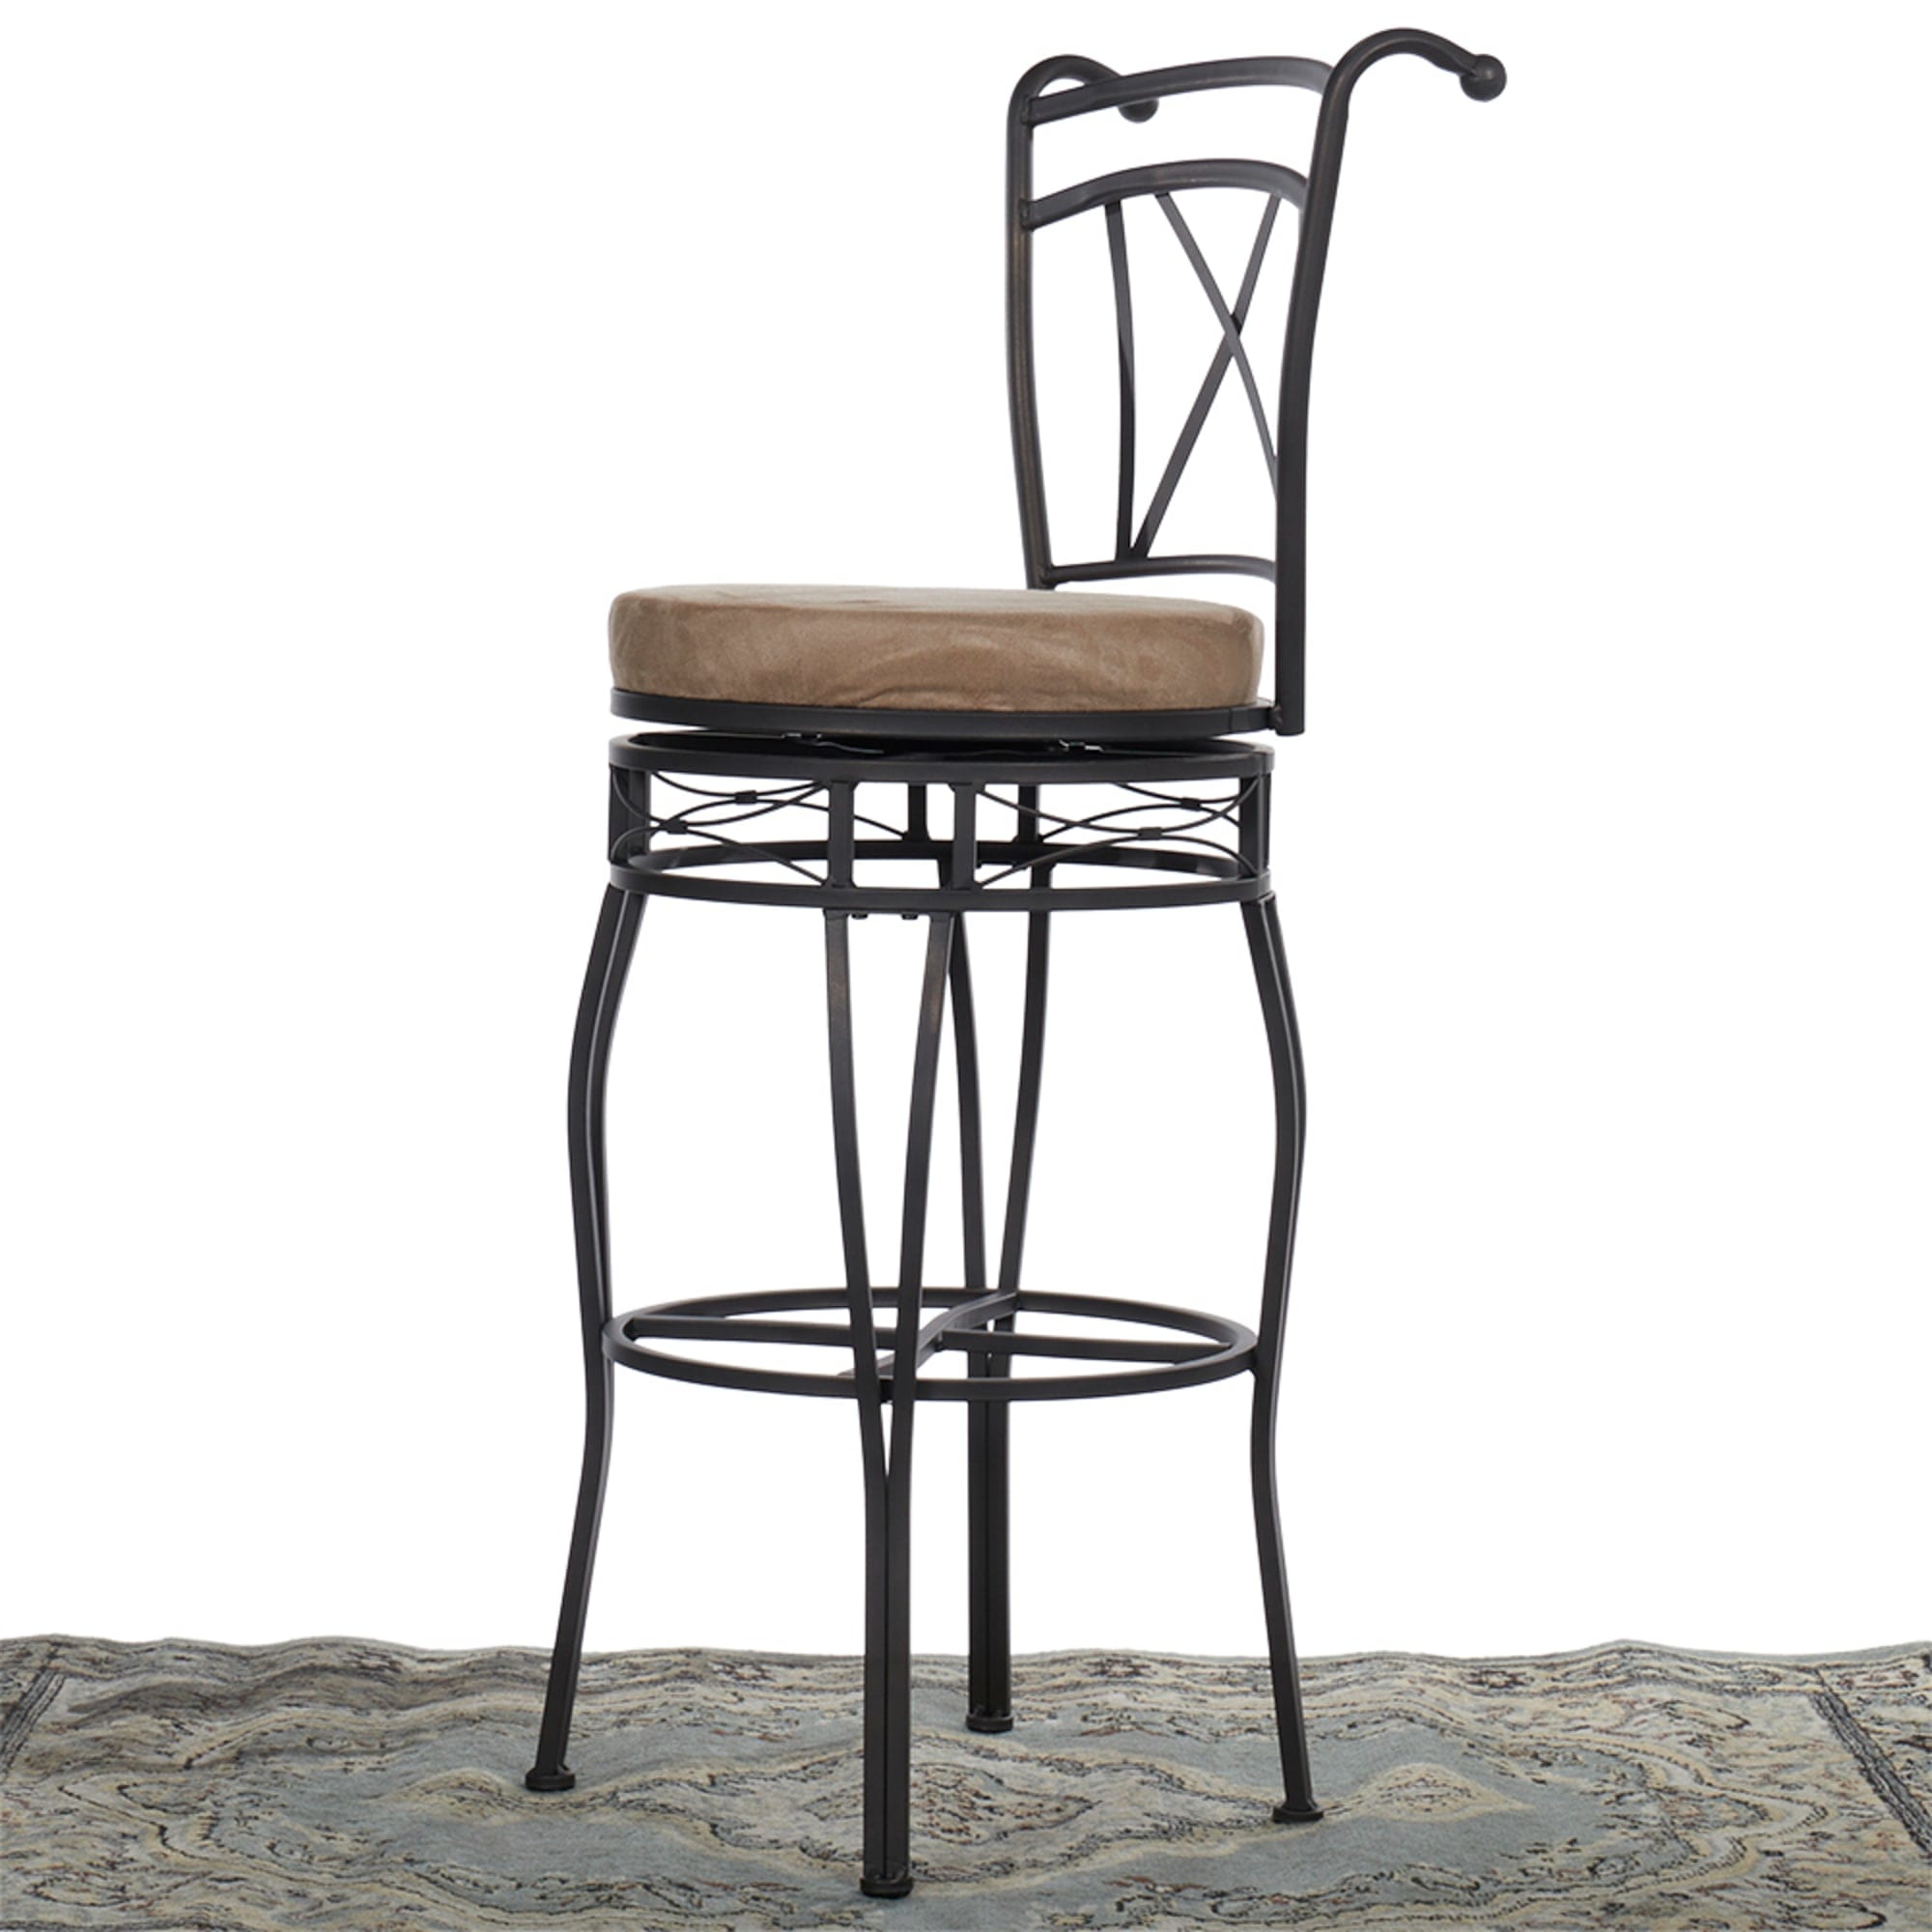 Home Basics X-Back Swivel Top Bar Stool with Cushioned Seat, Bronze $60 EACH, CASE PACK OF 1